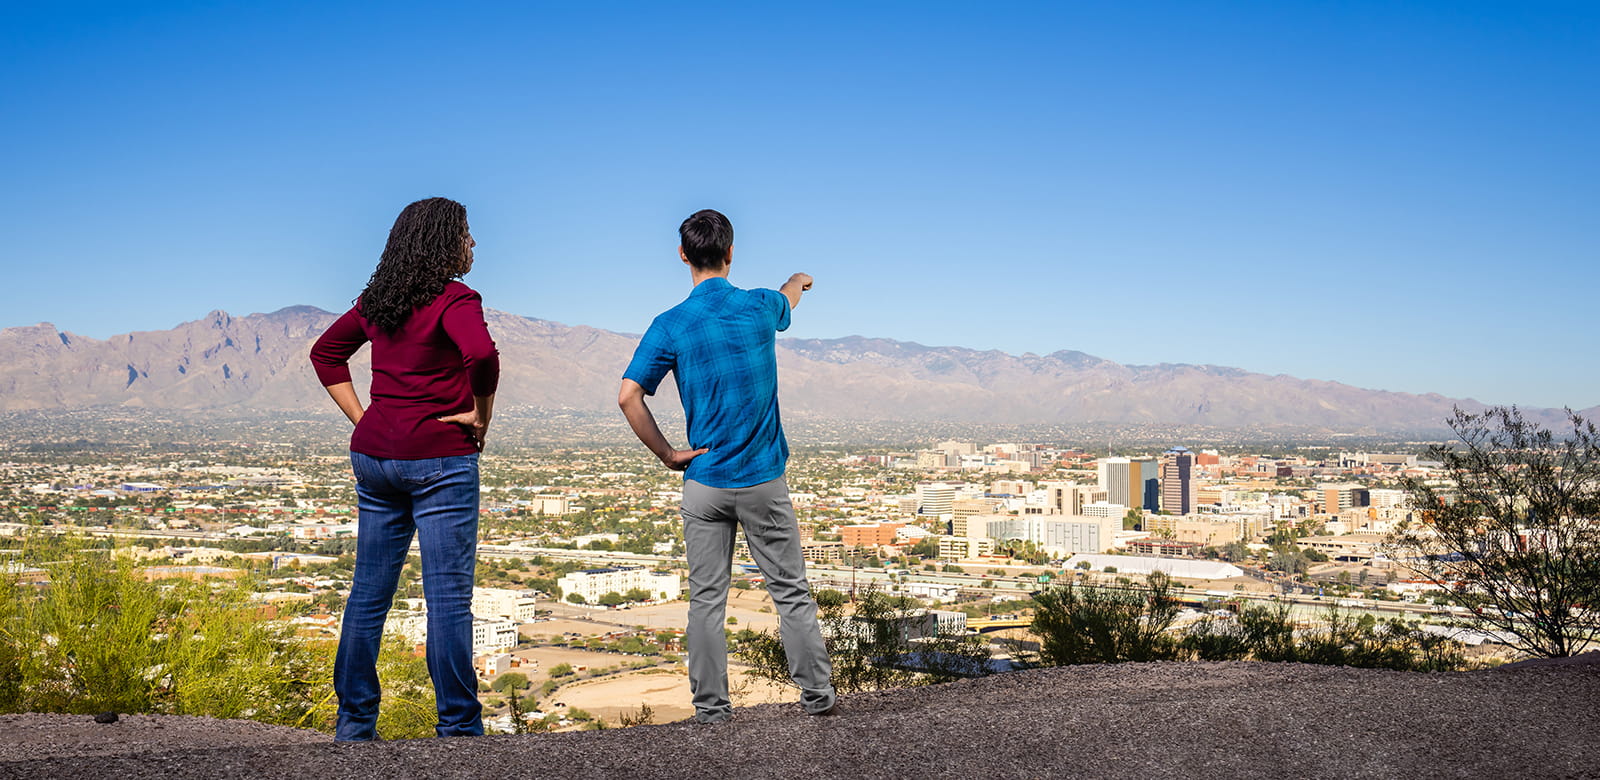 While hiking, two people take in a view of the Tucson valley.